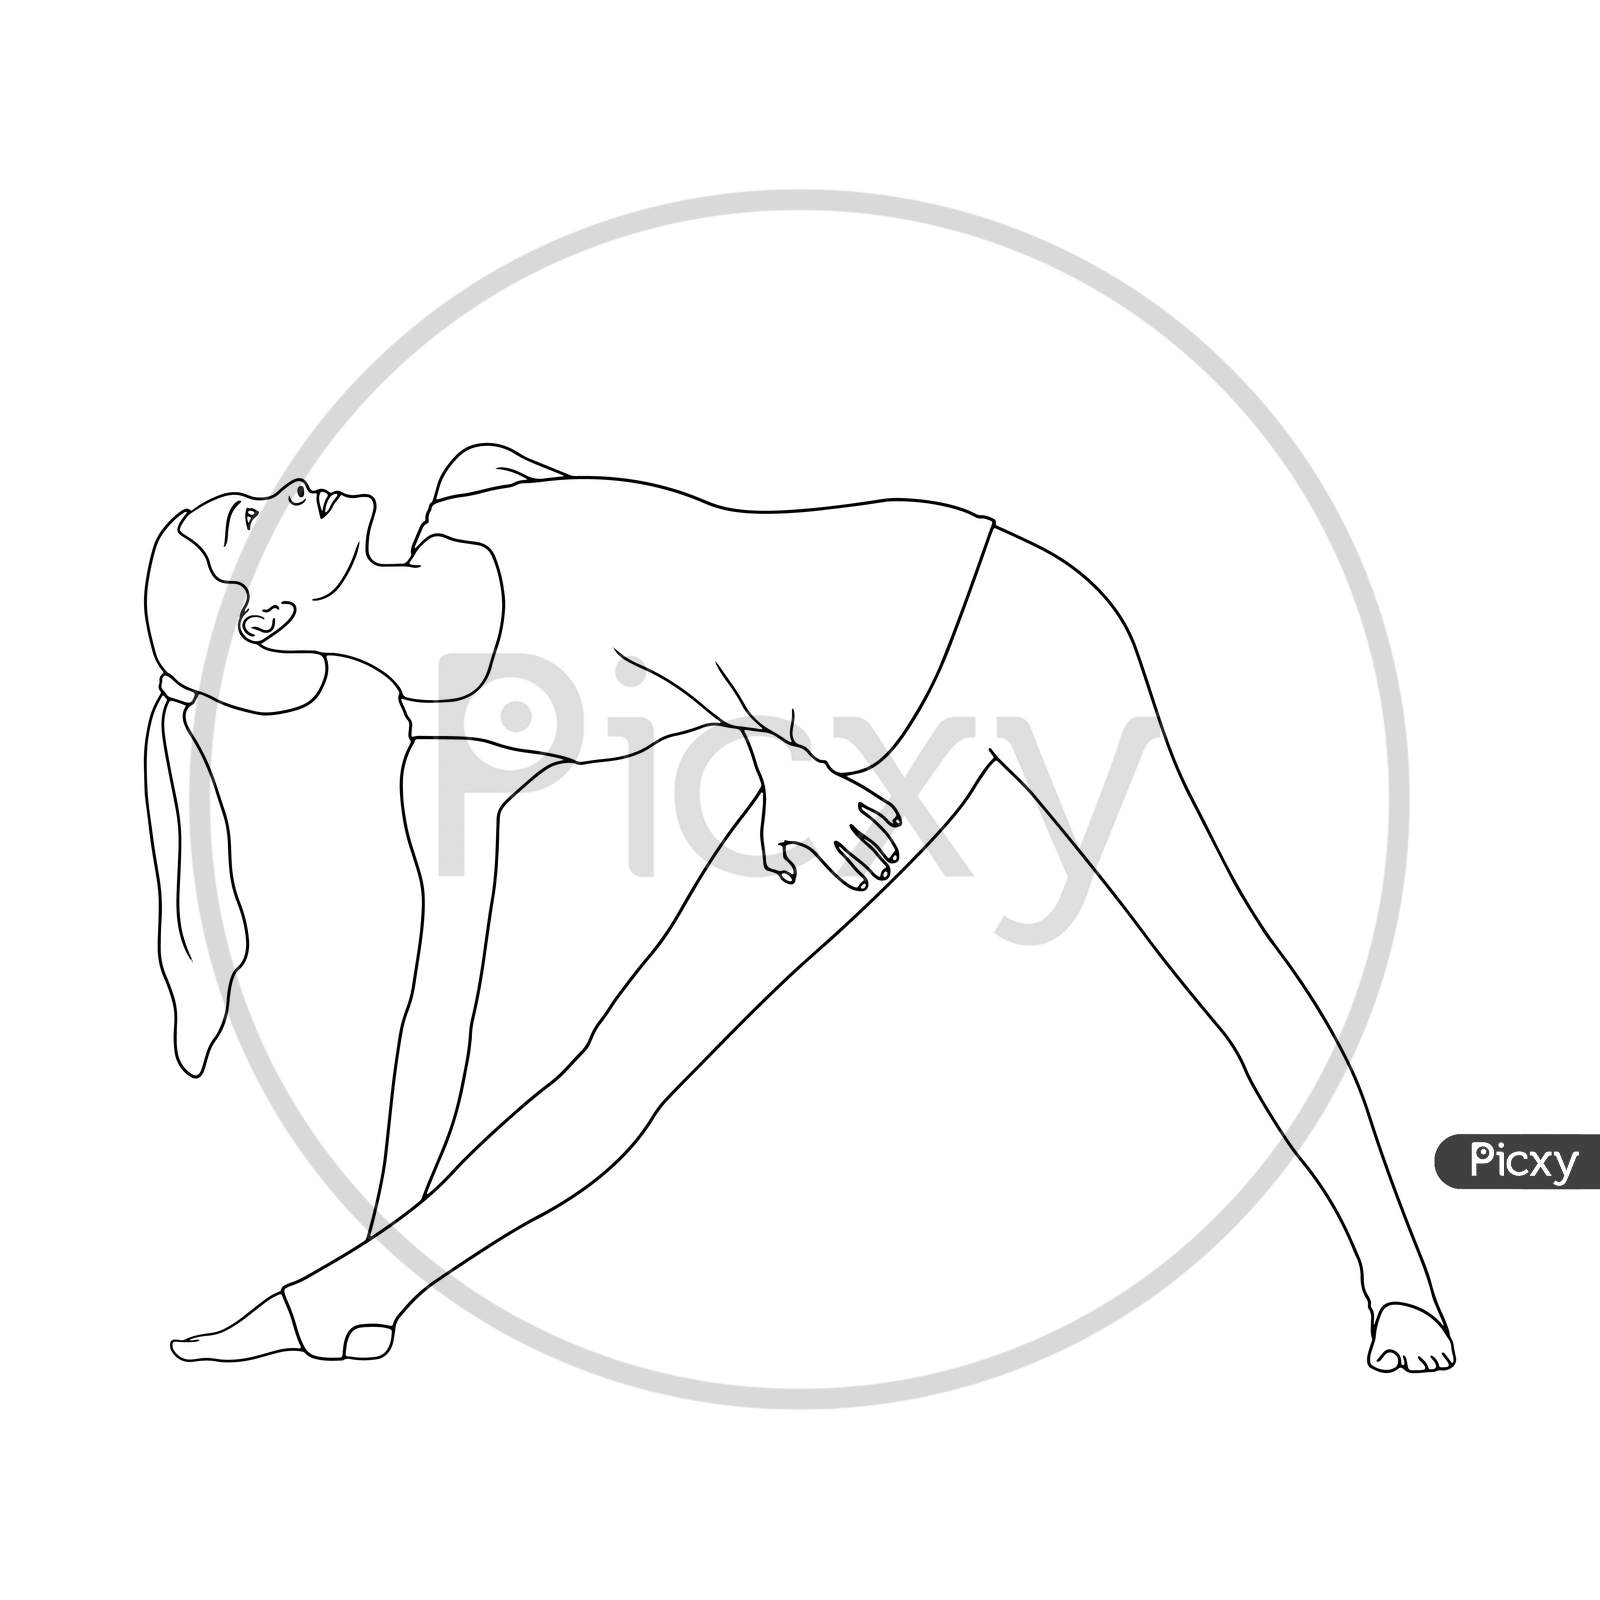 Yoga Pose Coloring Pages Stock Illustrations – 34 Yoga Pose Coloring Pages  Stock Illustrations, Vectors & Clipart - Dreamstime